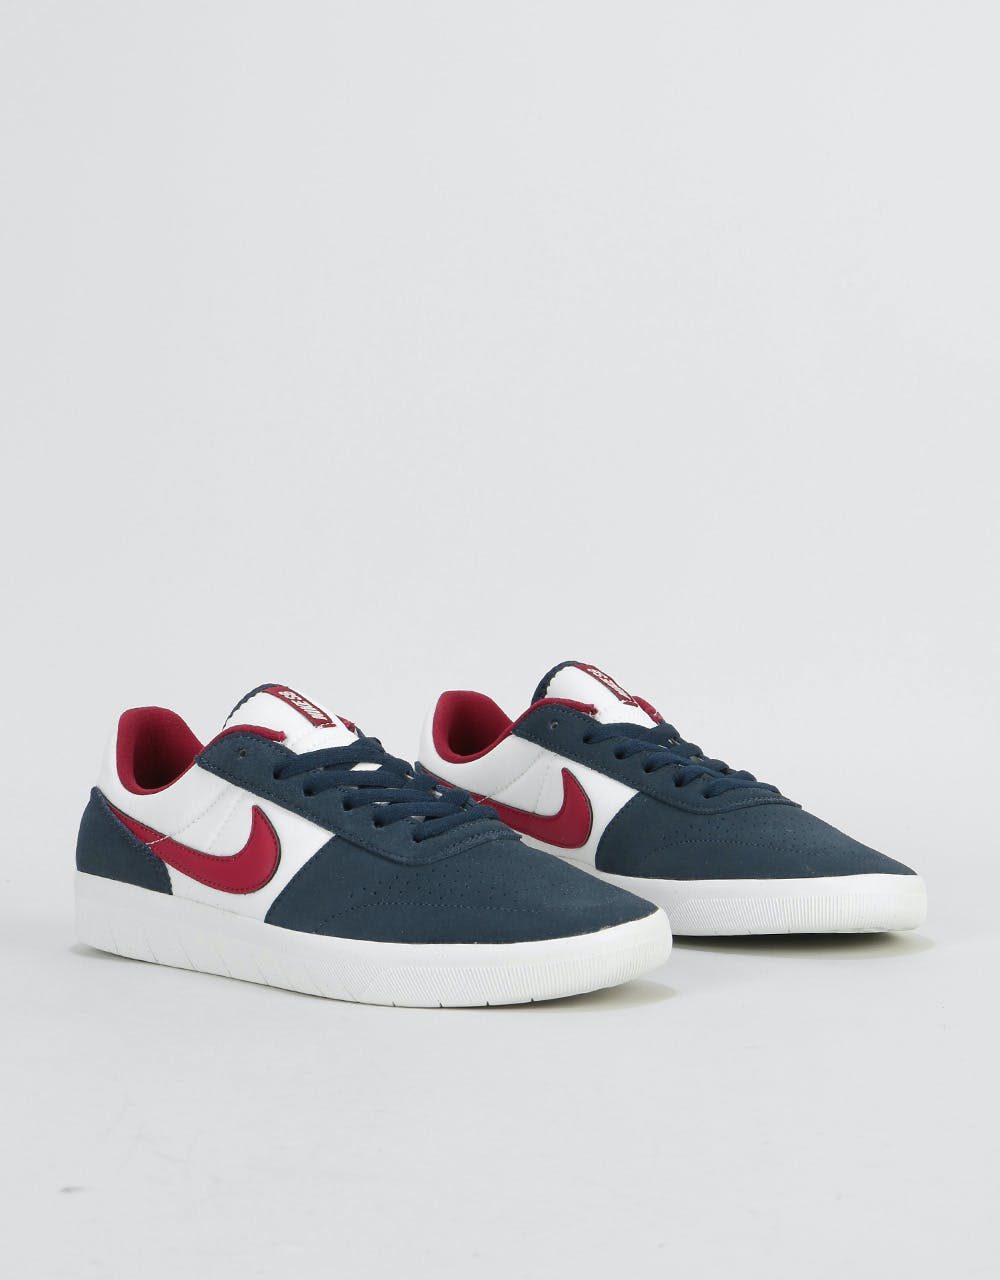 Nike SB Classic Skate Shoes - Obsidian/Team Red-Summit White – Route One